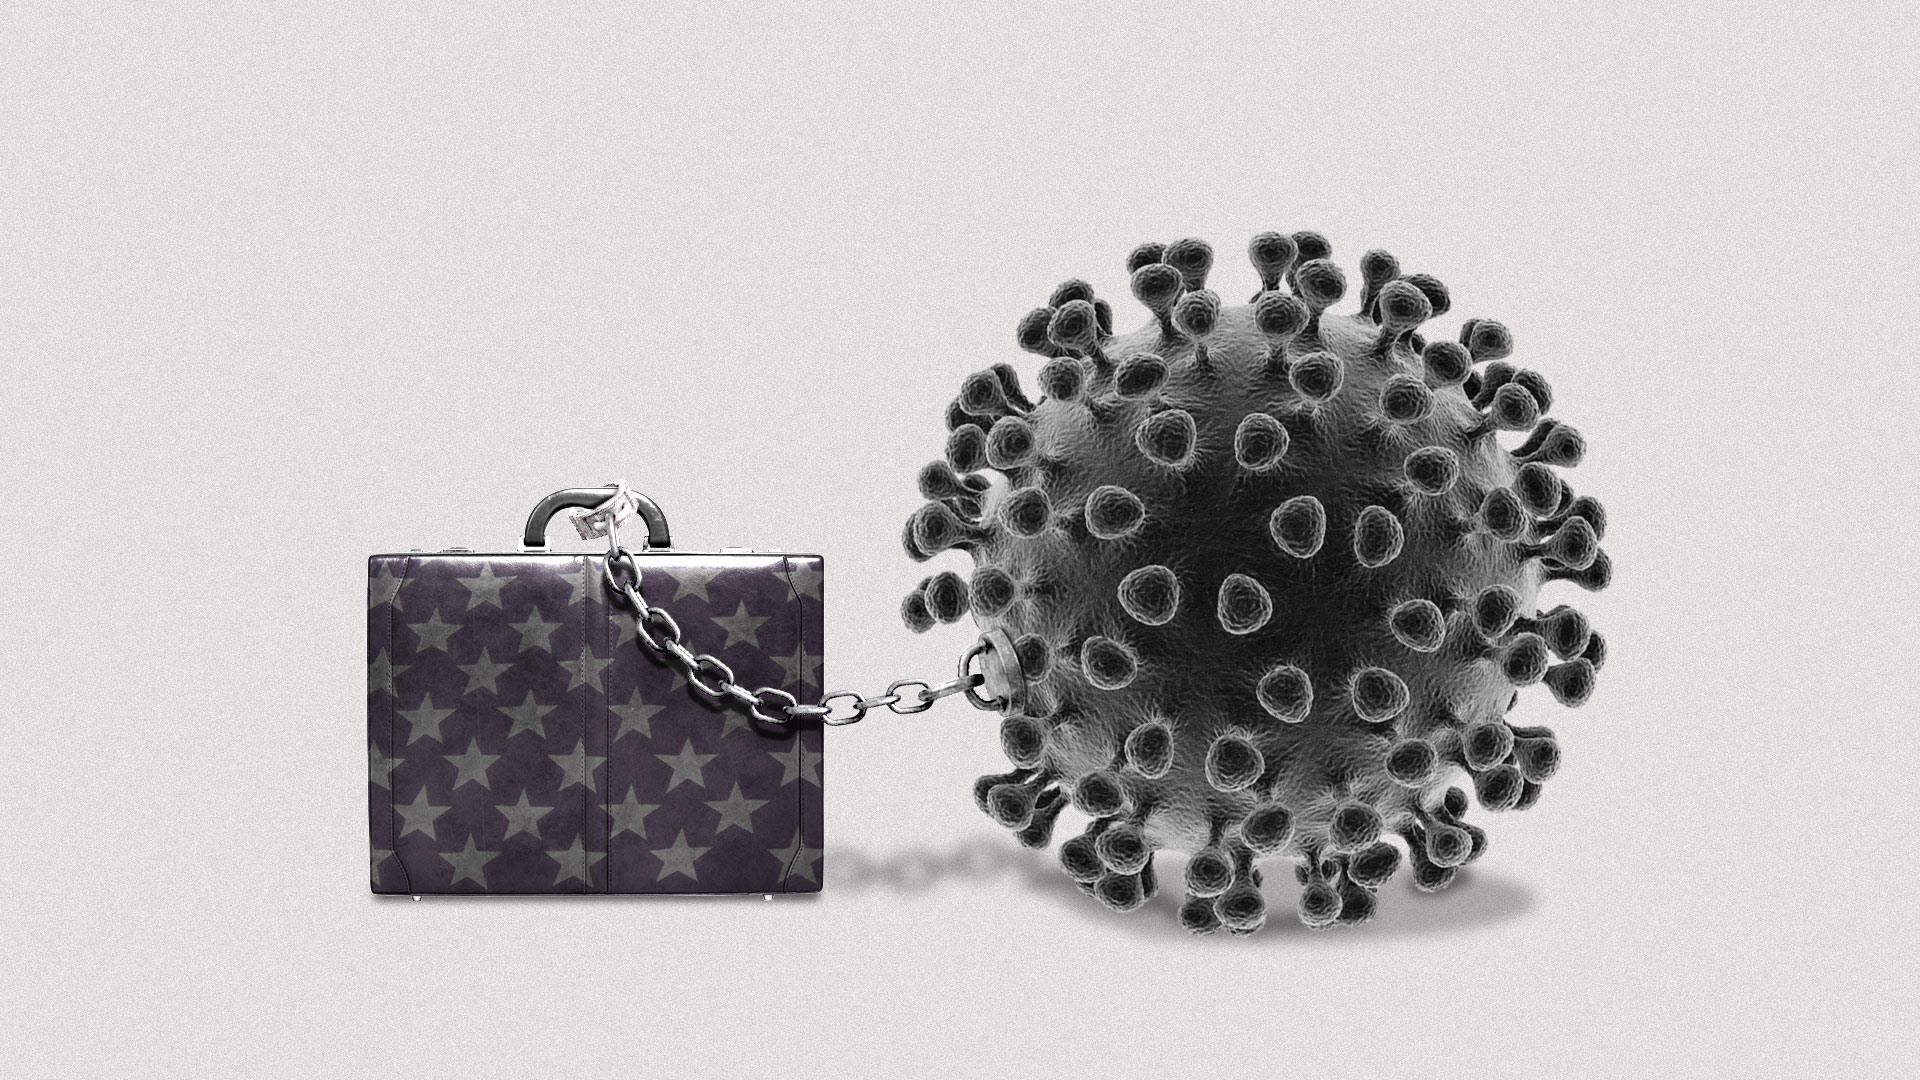 Illustration of briefcase with Coronavirus ball and chain.